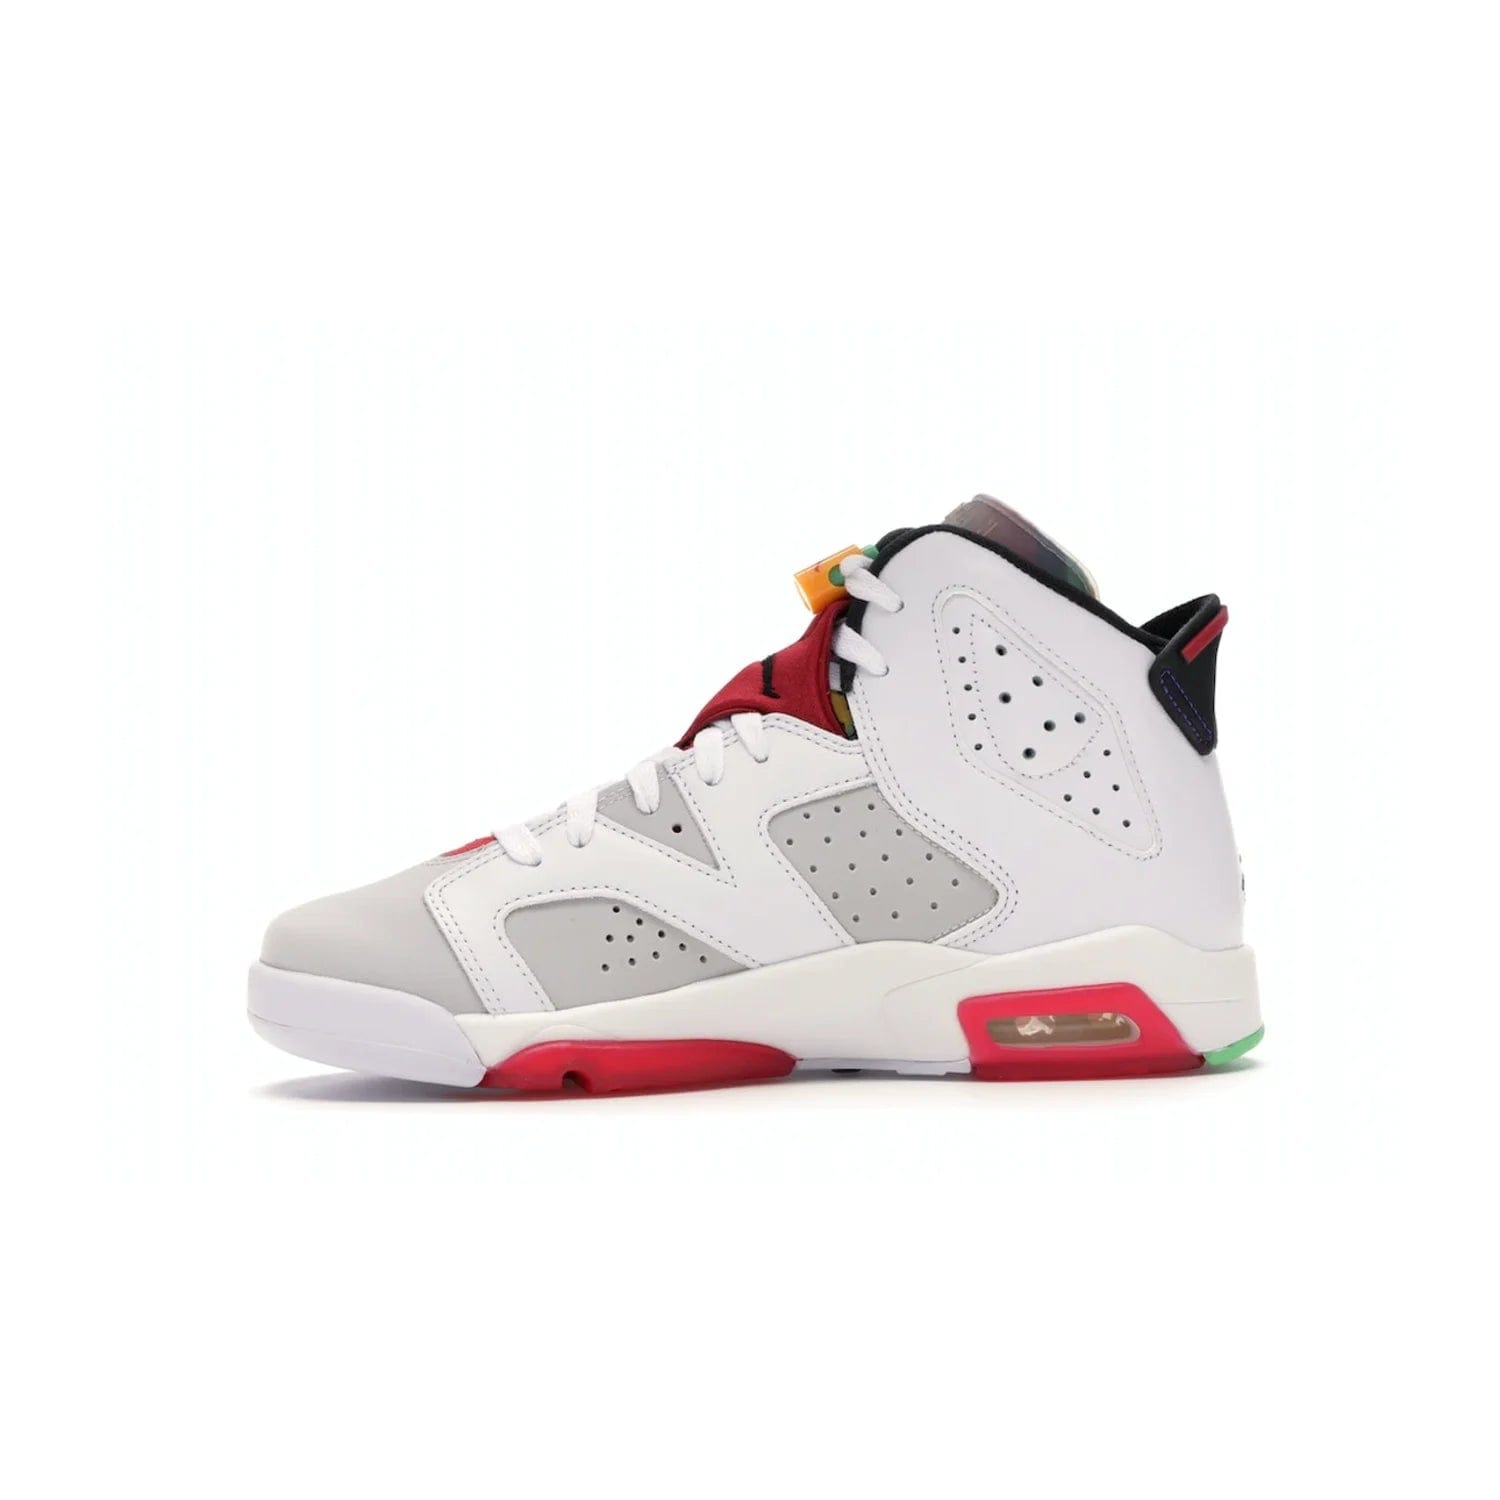 Jordan 6 Retro Hare (GS) - Image 18 - Only at www.BallersClubKickz.com - The Air Jordan 6 Hare GS. Comfortable suede upper, perforations, red pods, two-tone midsole, and signature "Jumpman" emblem. Released 17 June 2020. Perfect for any sneakerhead.